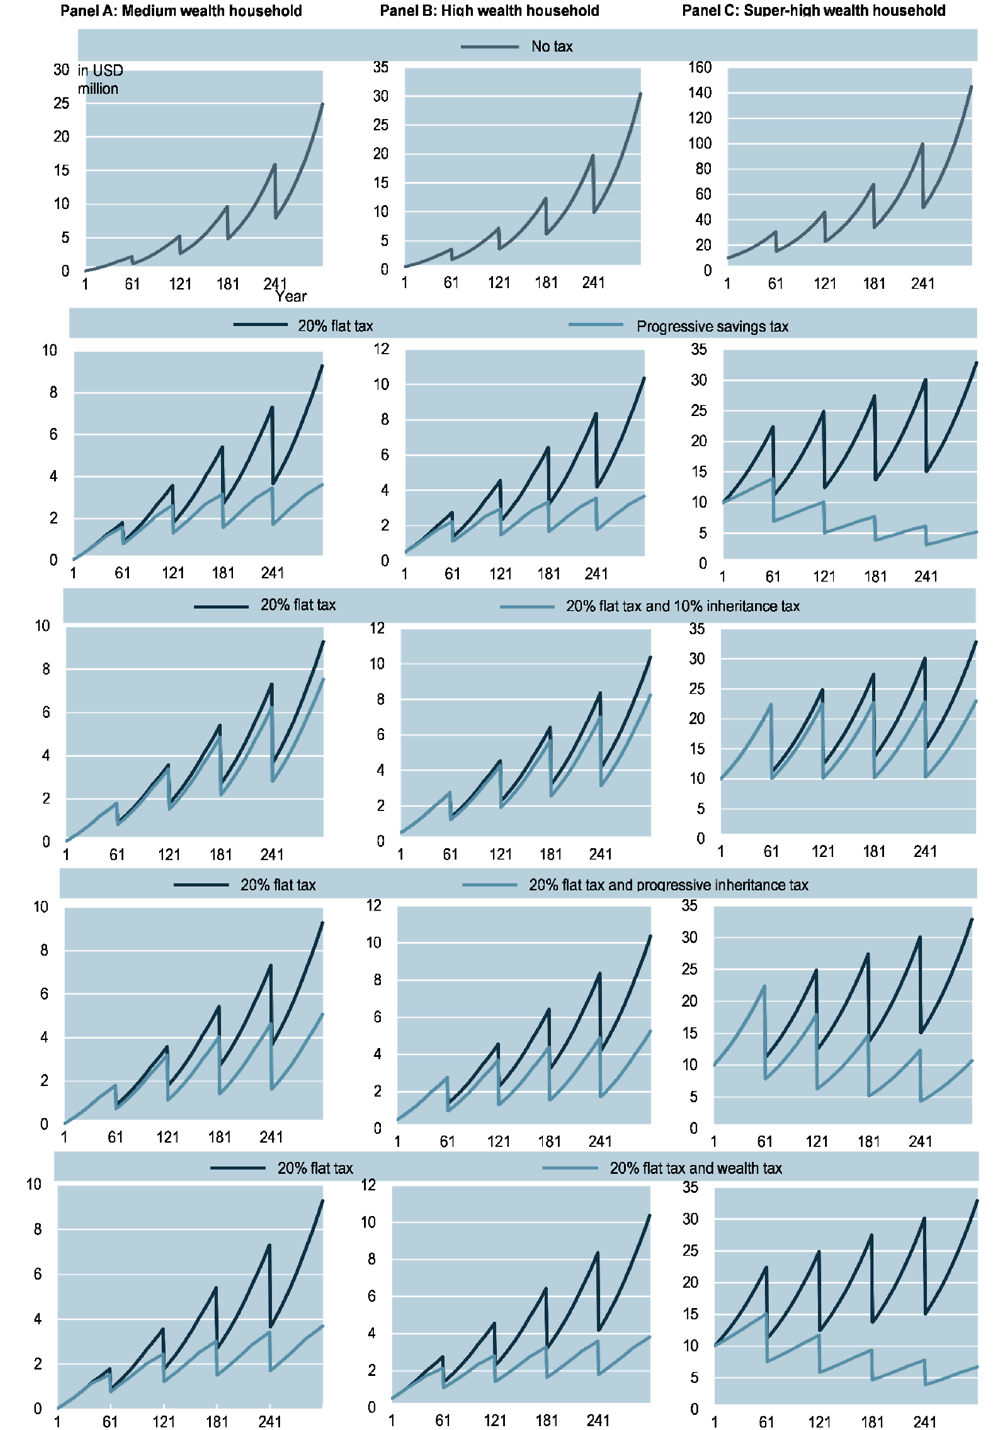 Figure 2.1. Simulations of wealth accumulation over five generations for different types of households under different tax scenarios